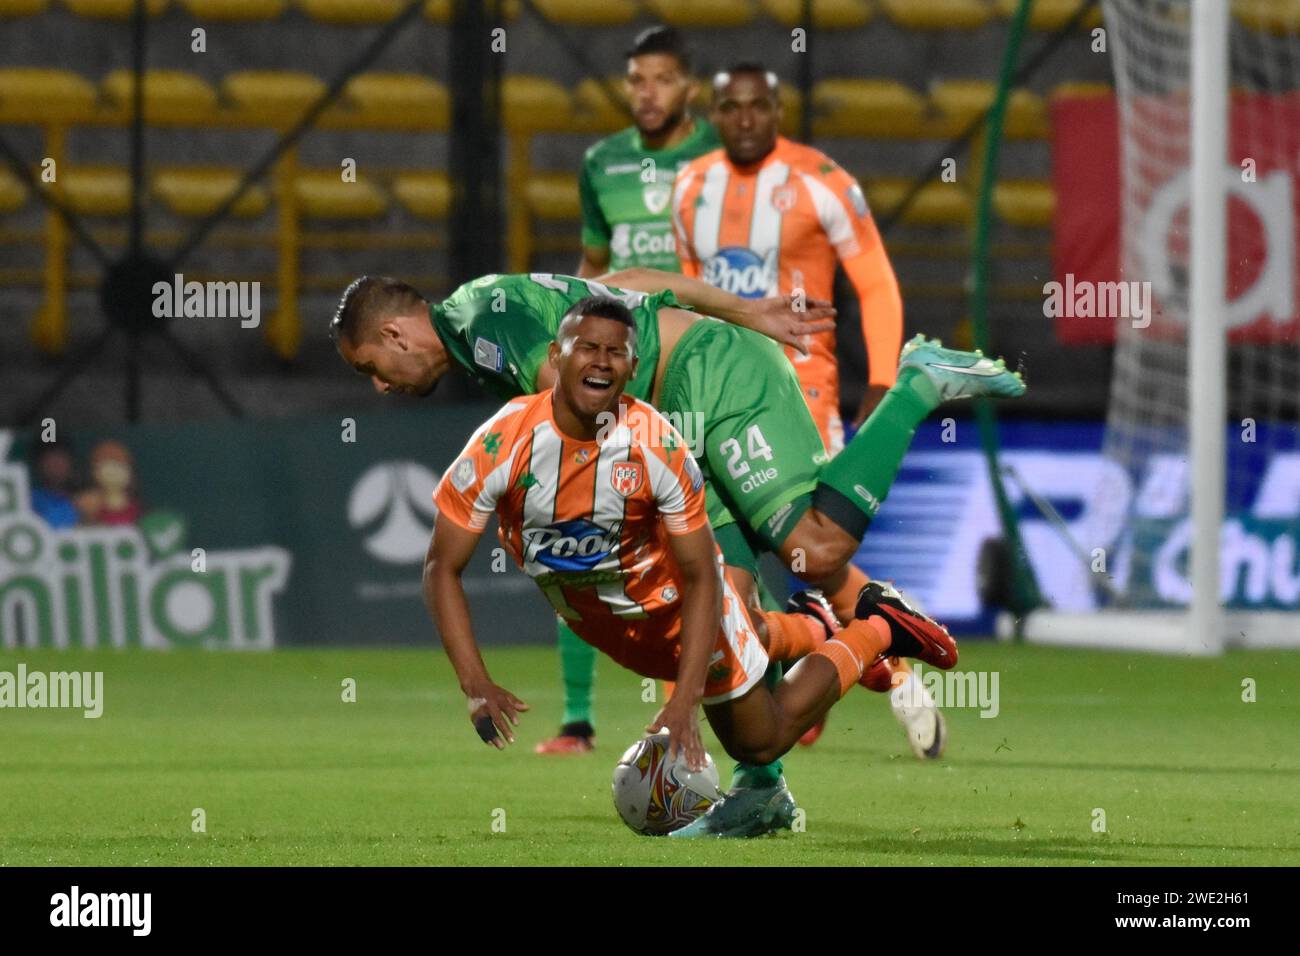 Bogota, Colombia. 22nd Jan, 2024. Envigado's Rubio Cesar Espana falls after fighting for a ball against Equidad's Juan Alejandro Maecha during the Equidad vs Envigado match for the Betplay Dimayor league in the Techo stadium in Bogota, Colombia, January 22, 2024. Photo by: Cristian Bayona/Long Visual Press Credit: Long Visual Press/Alamy Live News Stock Photo